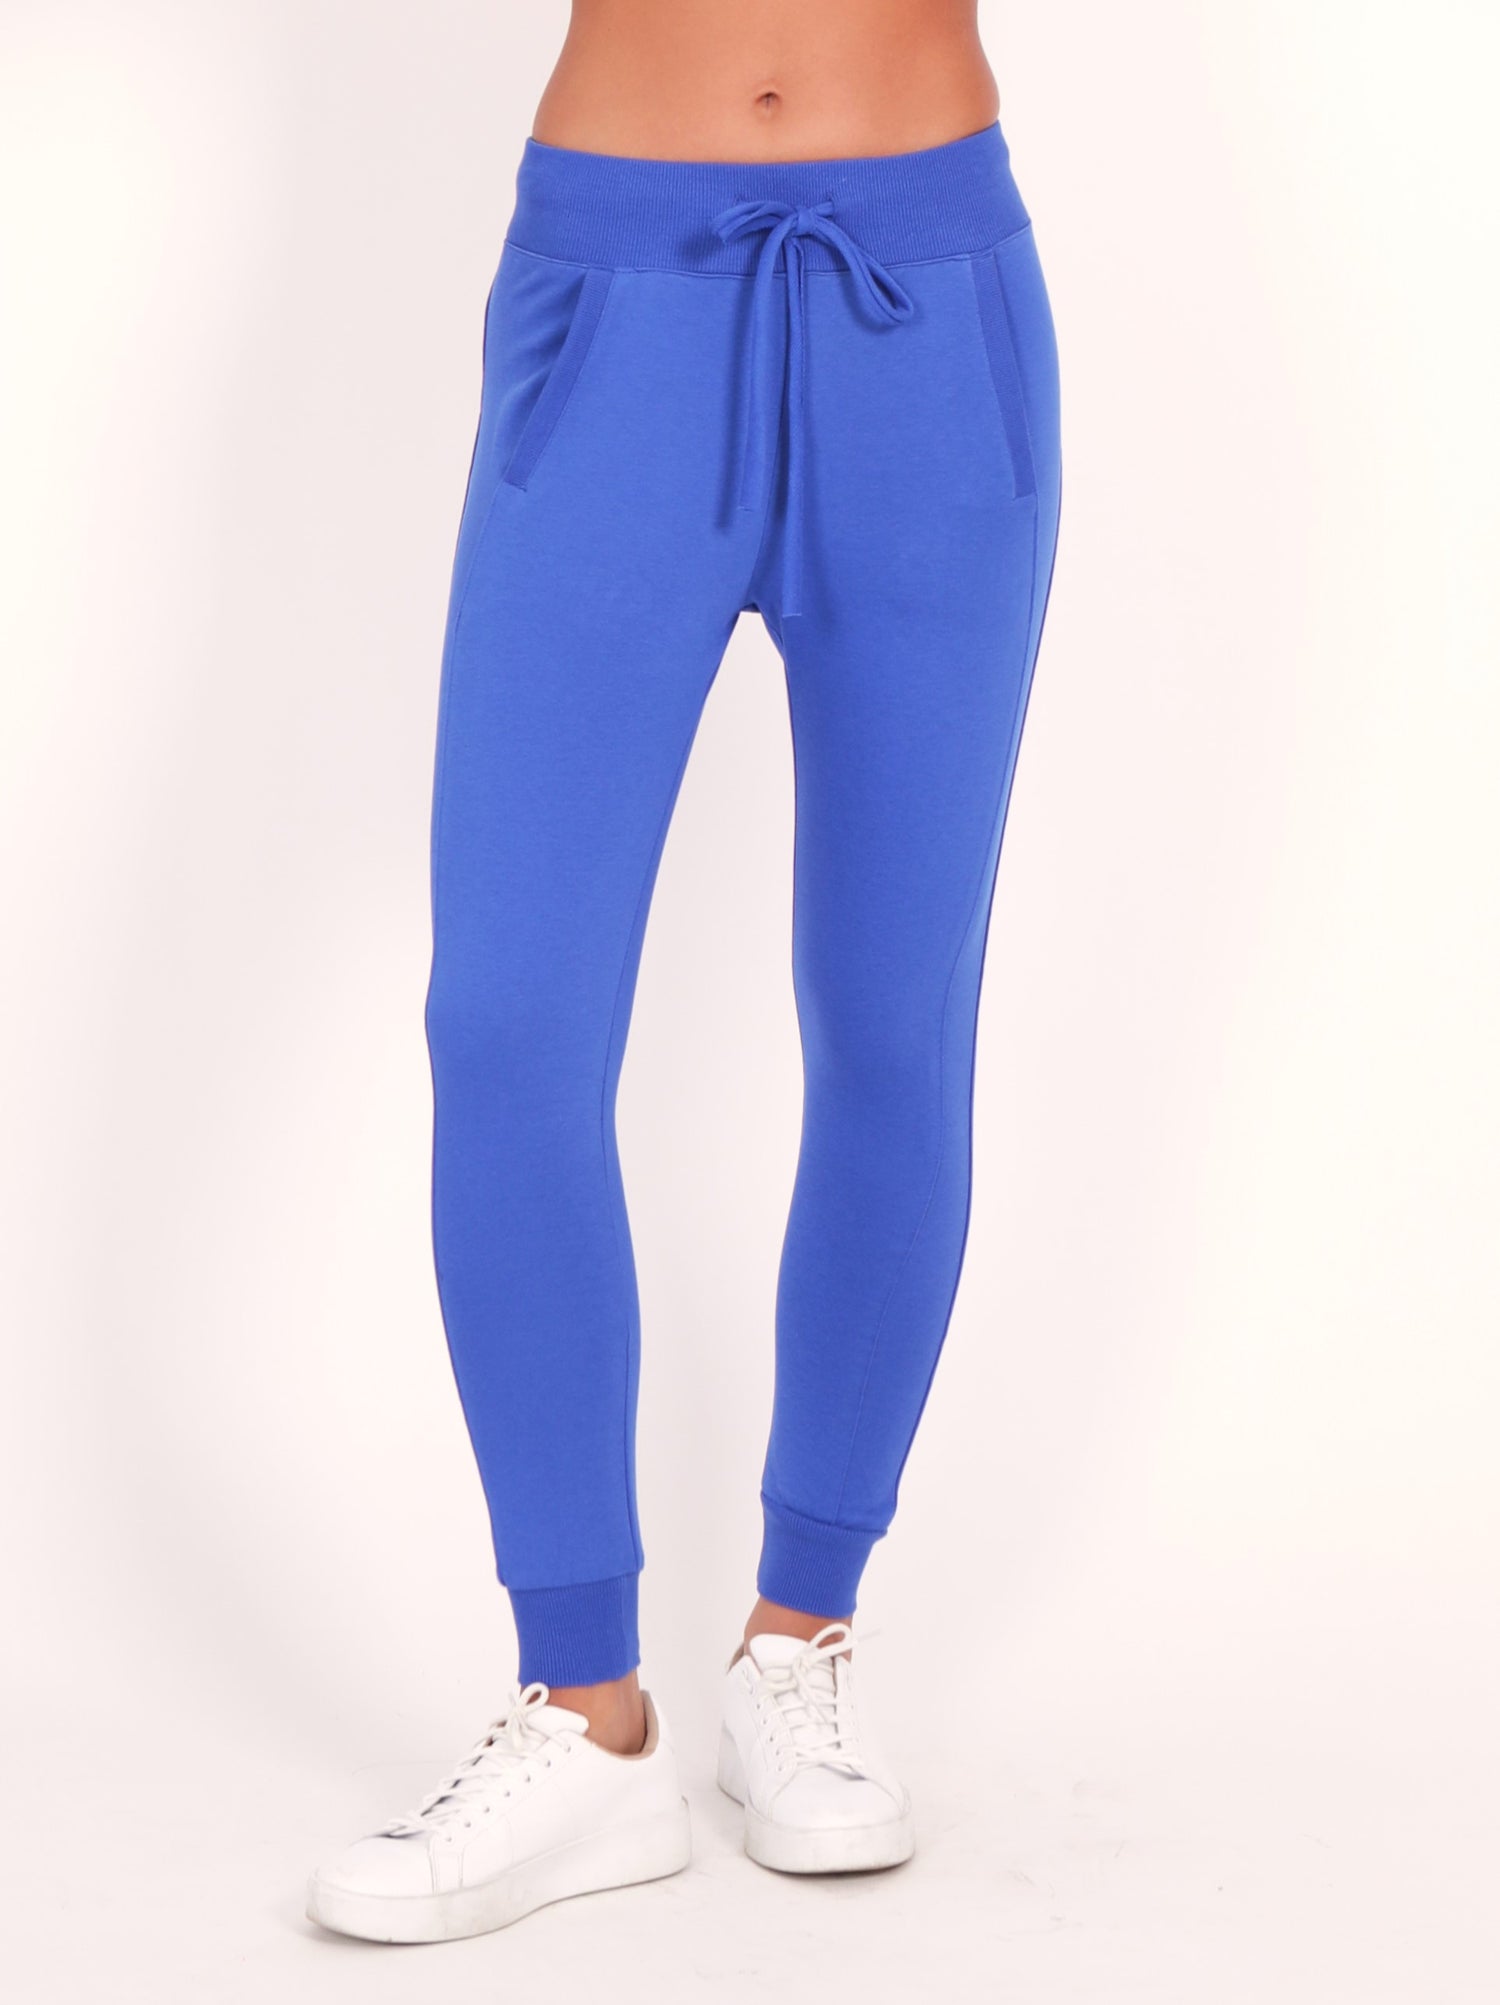 Oxford Joggers (Blue) - Something For Me​​